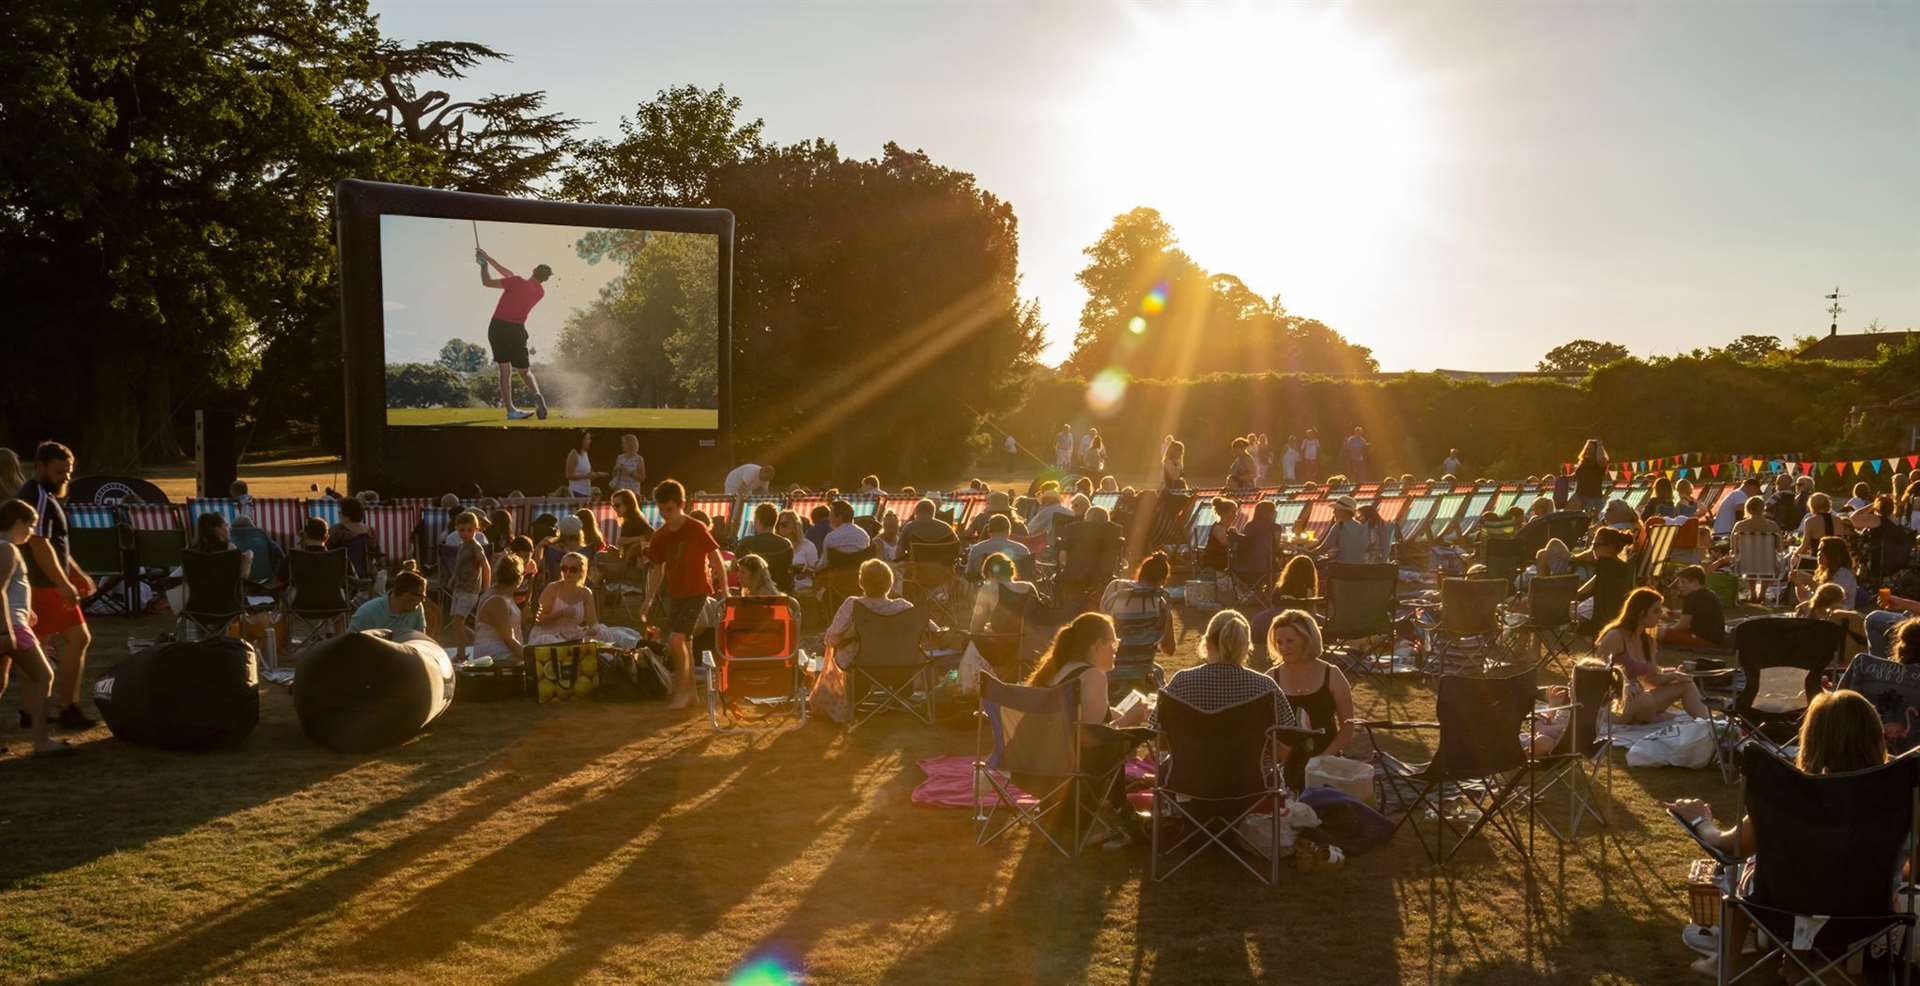 Fans can watch The Open on screens at Betteshanger country park